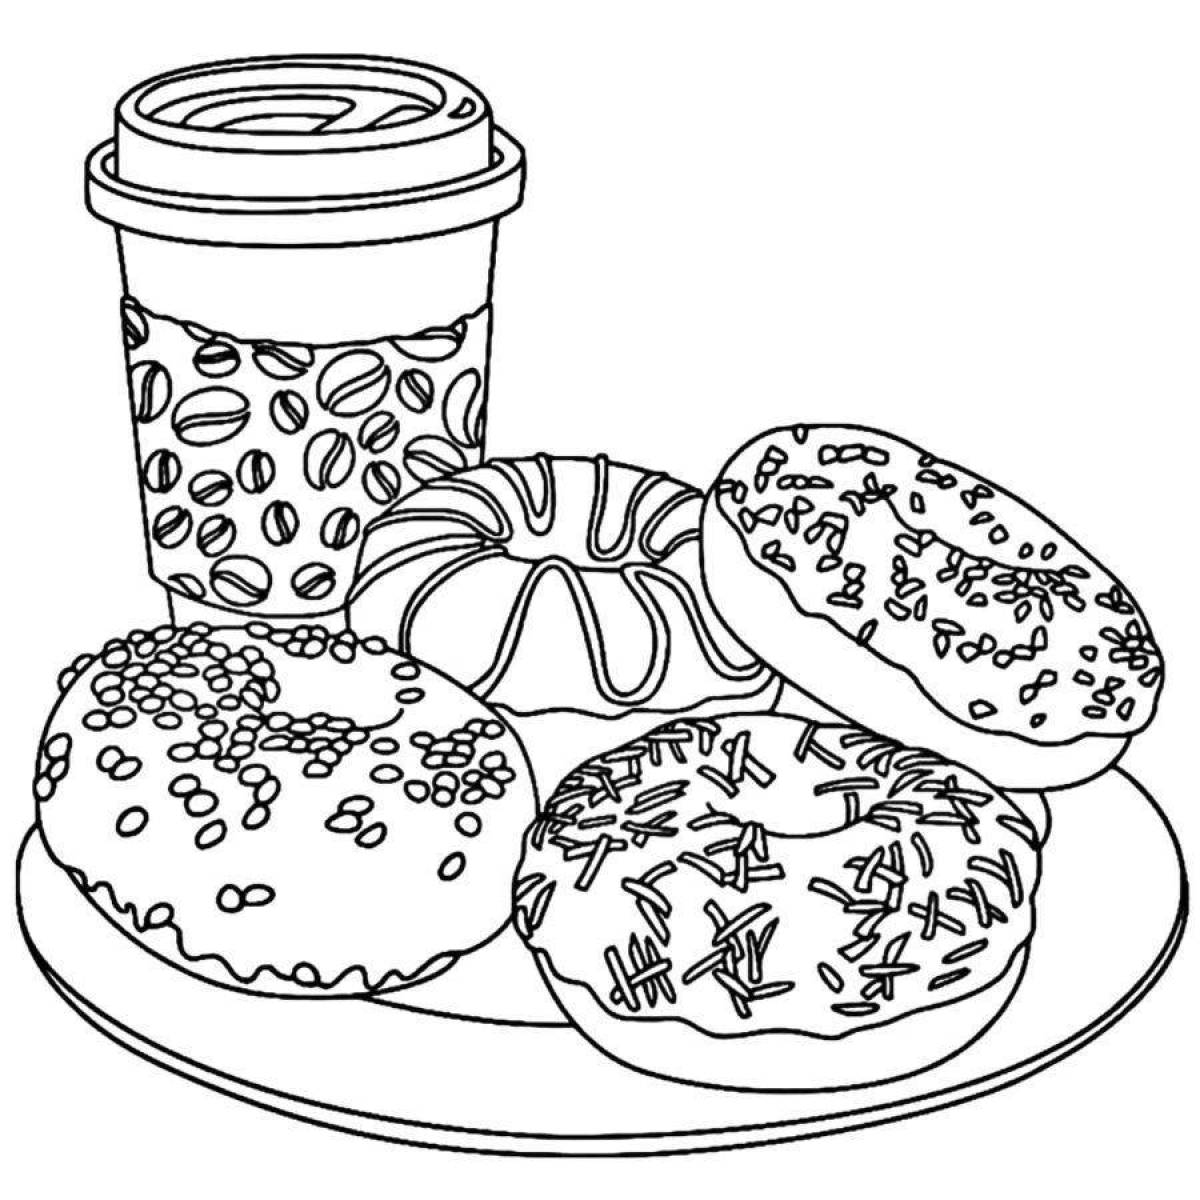 Nutritious breakfast coloring page